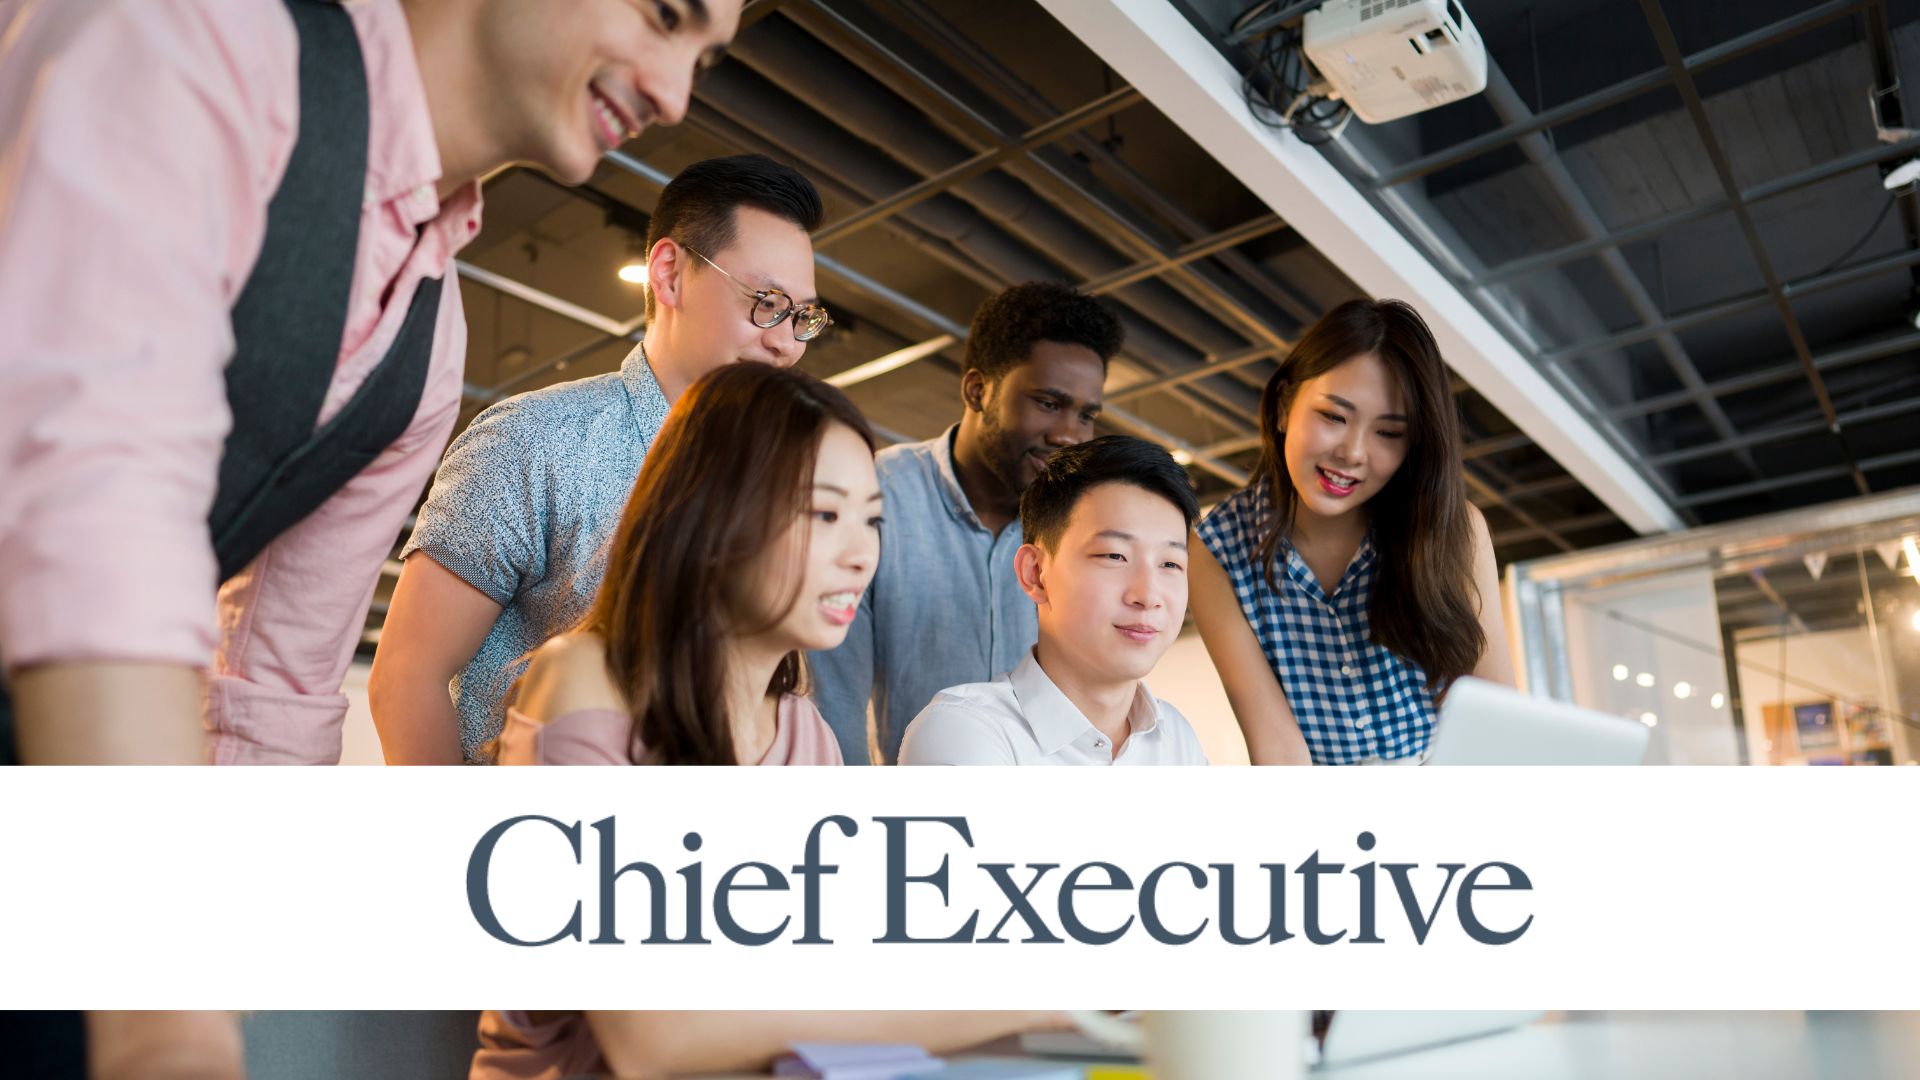 Chief Executive Comparing Employees